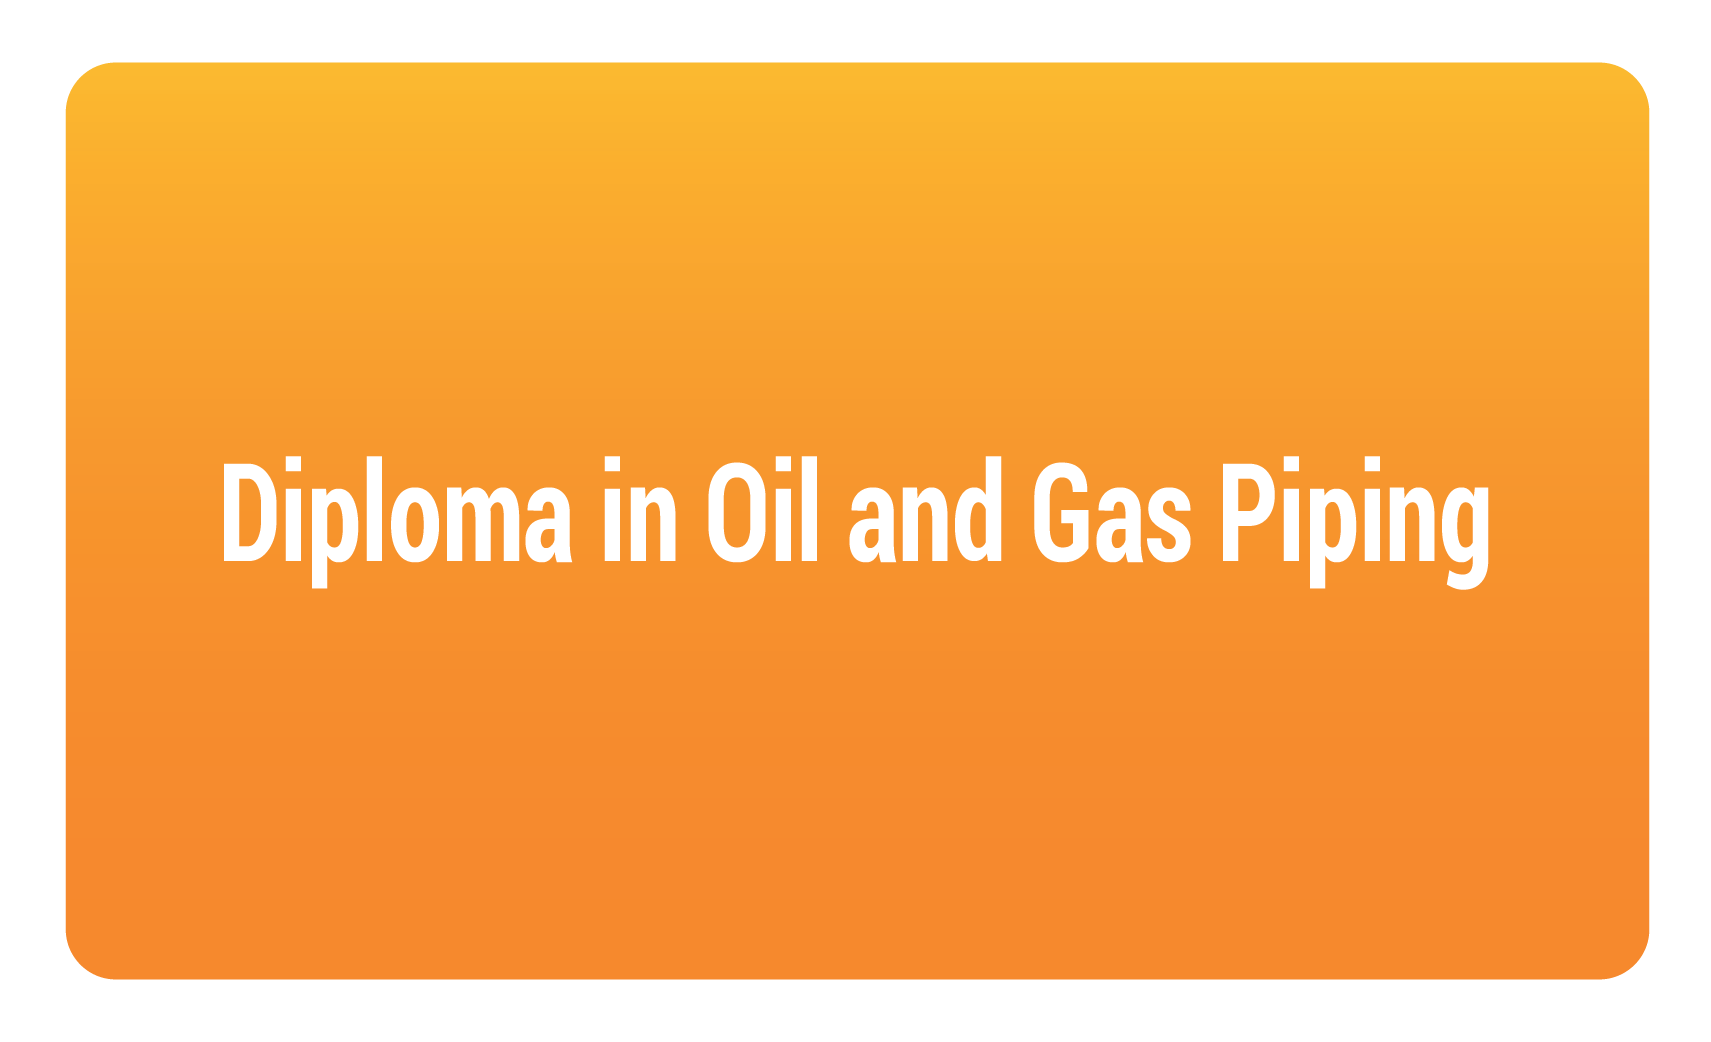 Diploma in oil and gas piping|Thiruvananthapuram Kerala-SMEClabs